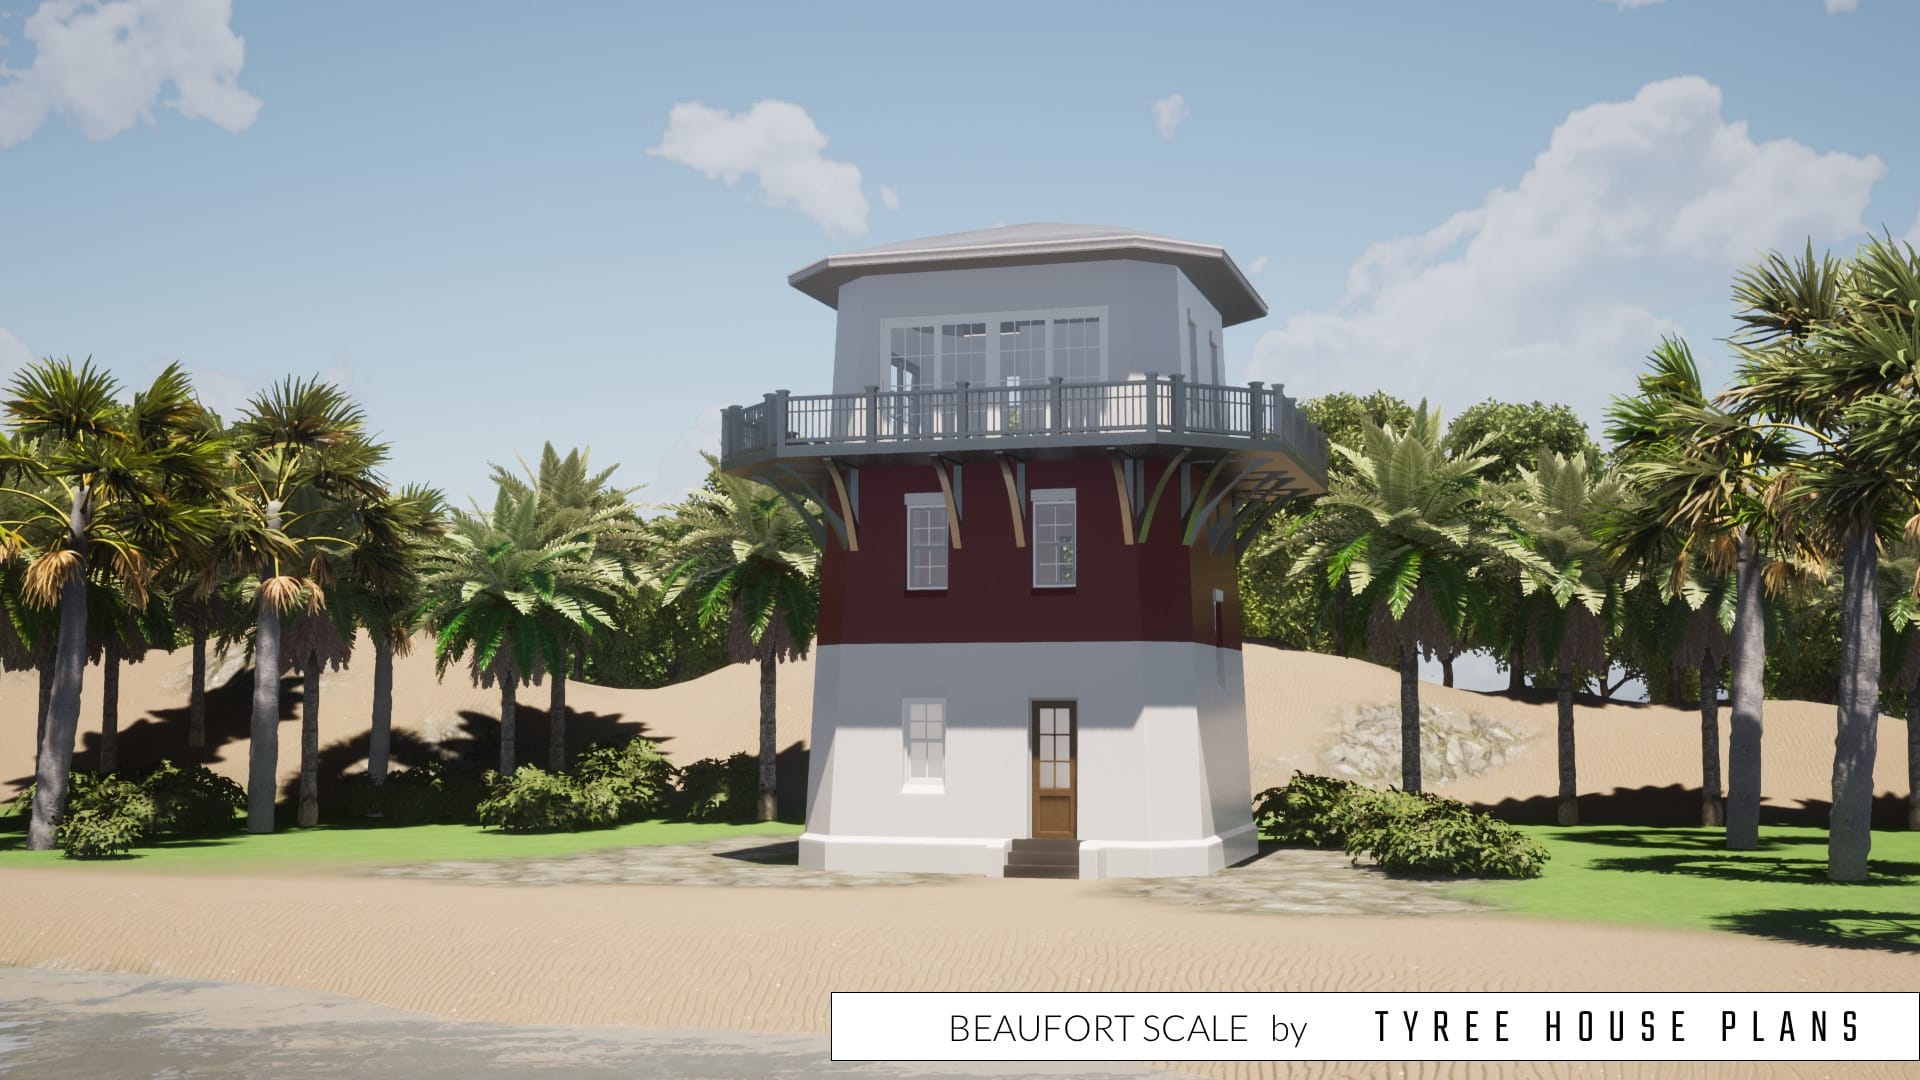 Front of the lighthouse. Beaufort Scale by Tyree House Plans.